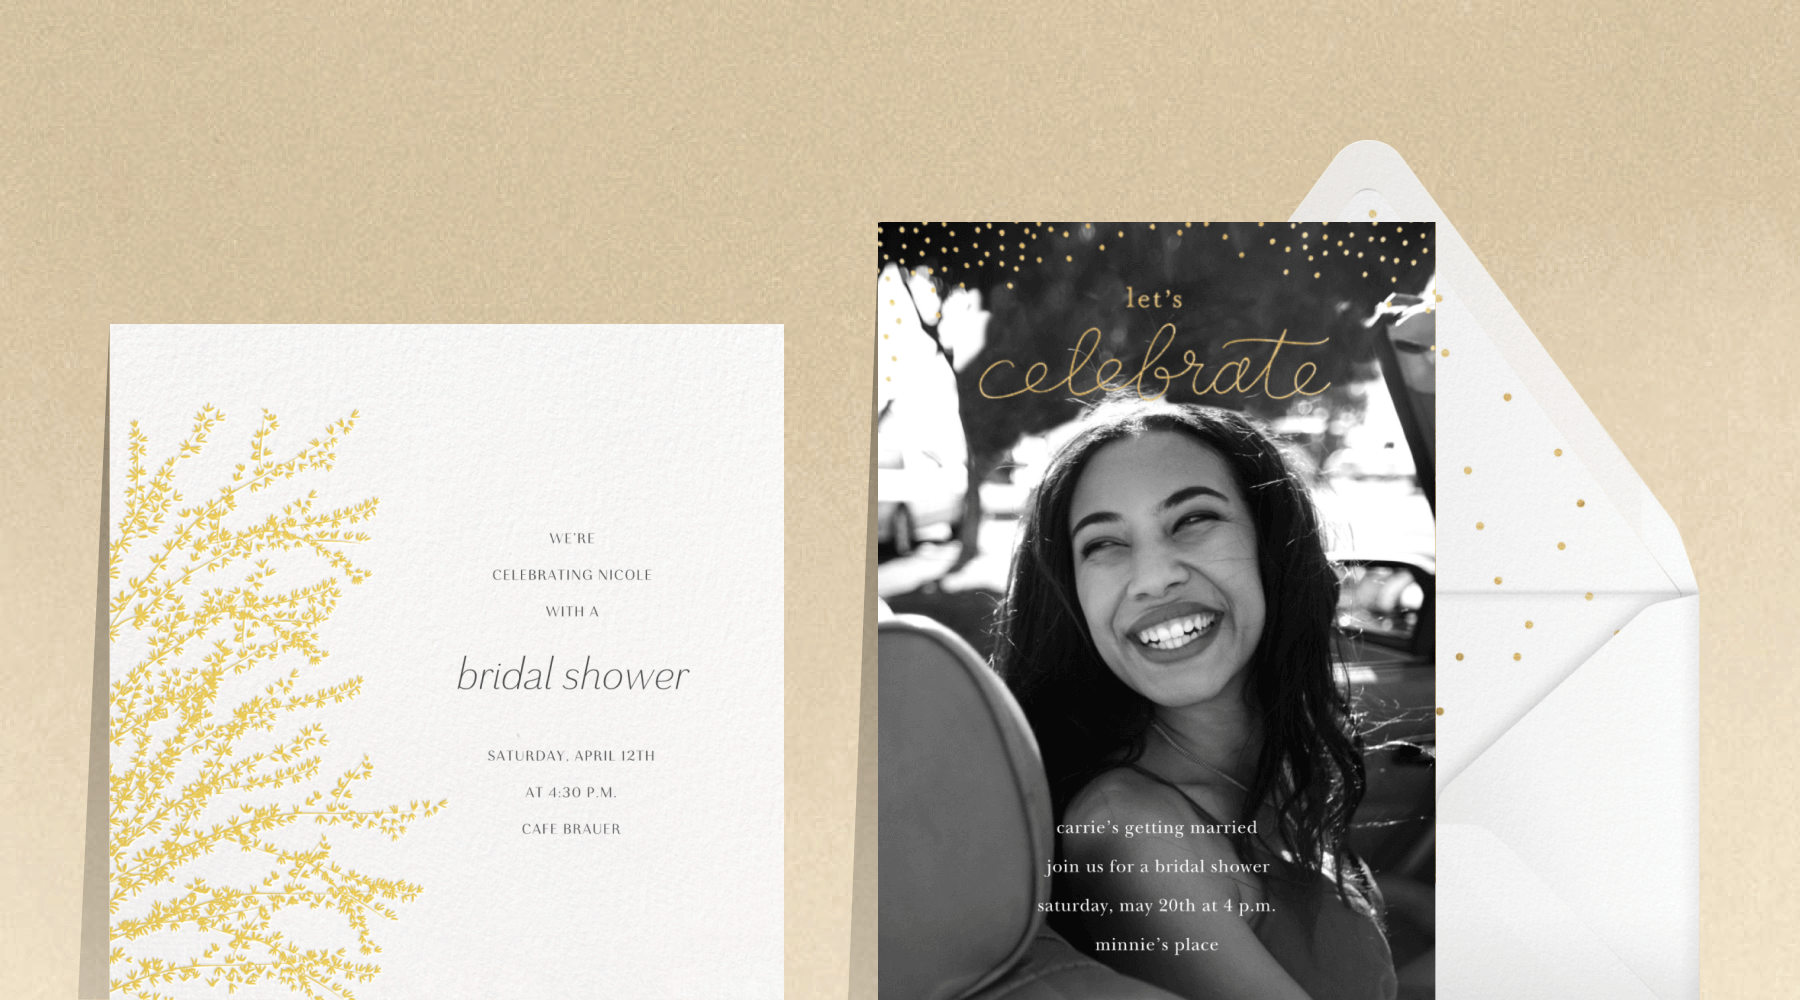 Two formal bridal shower invitations: one with gold forsythia illustration, and one with a photo.